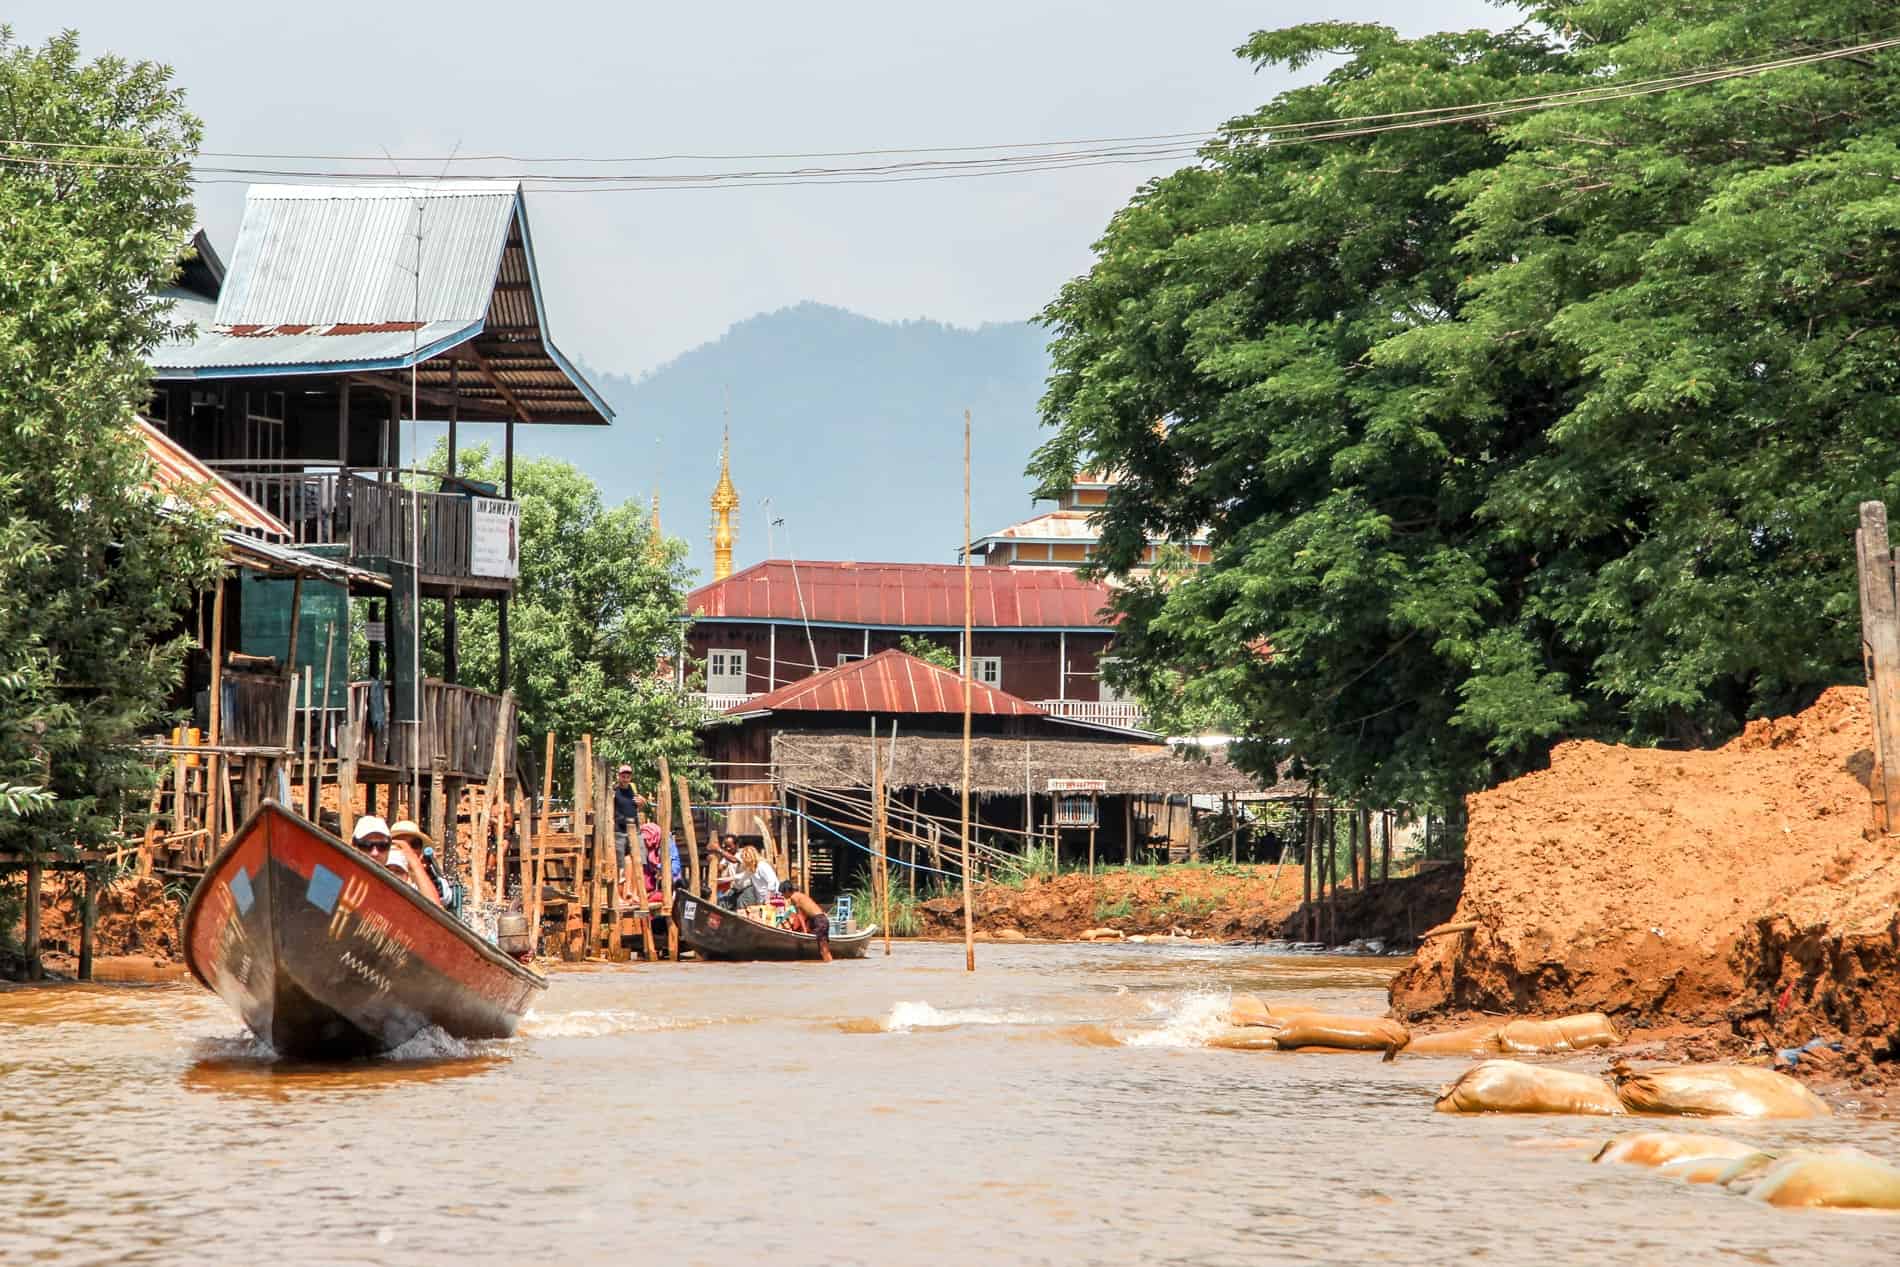 Boats of tourists on a shallow water canal on Inle Lake with bamboo stilt houses lining the banks. 